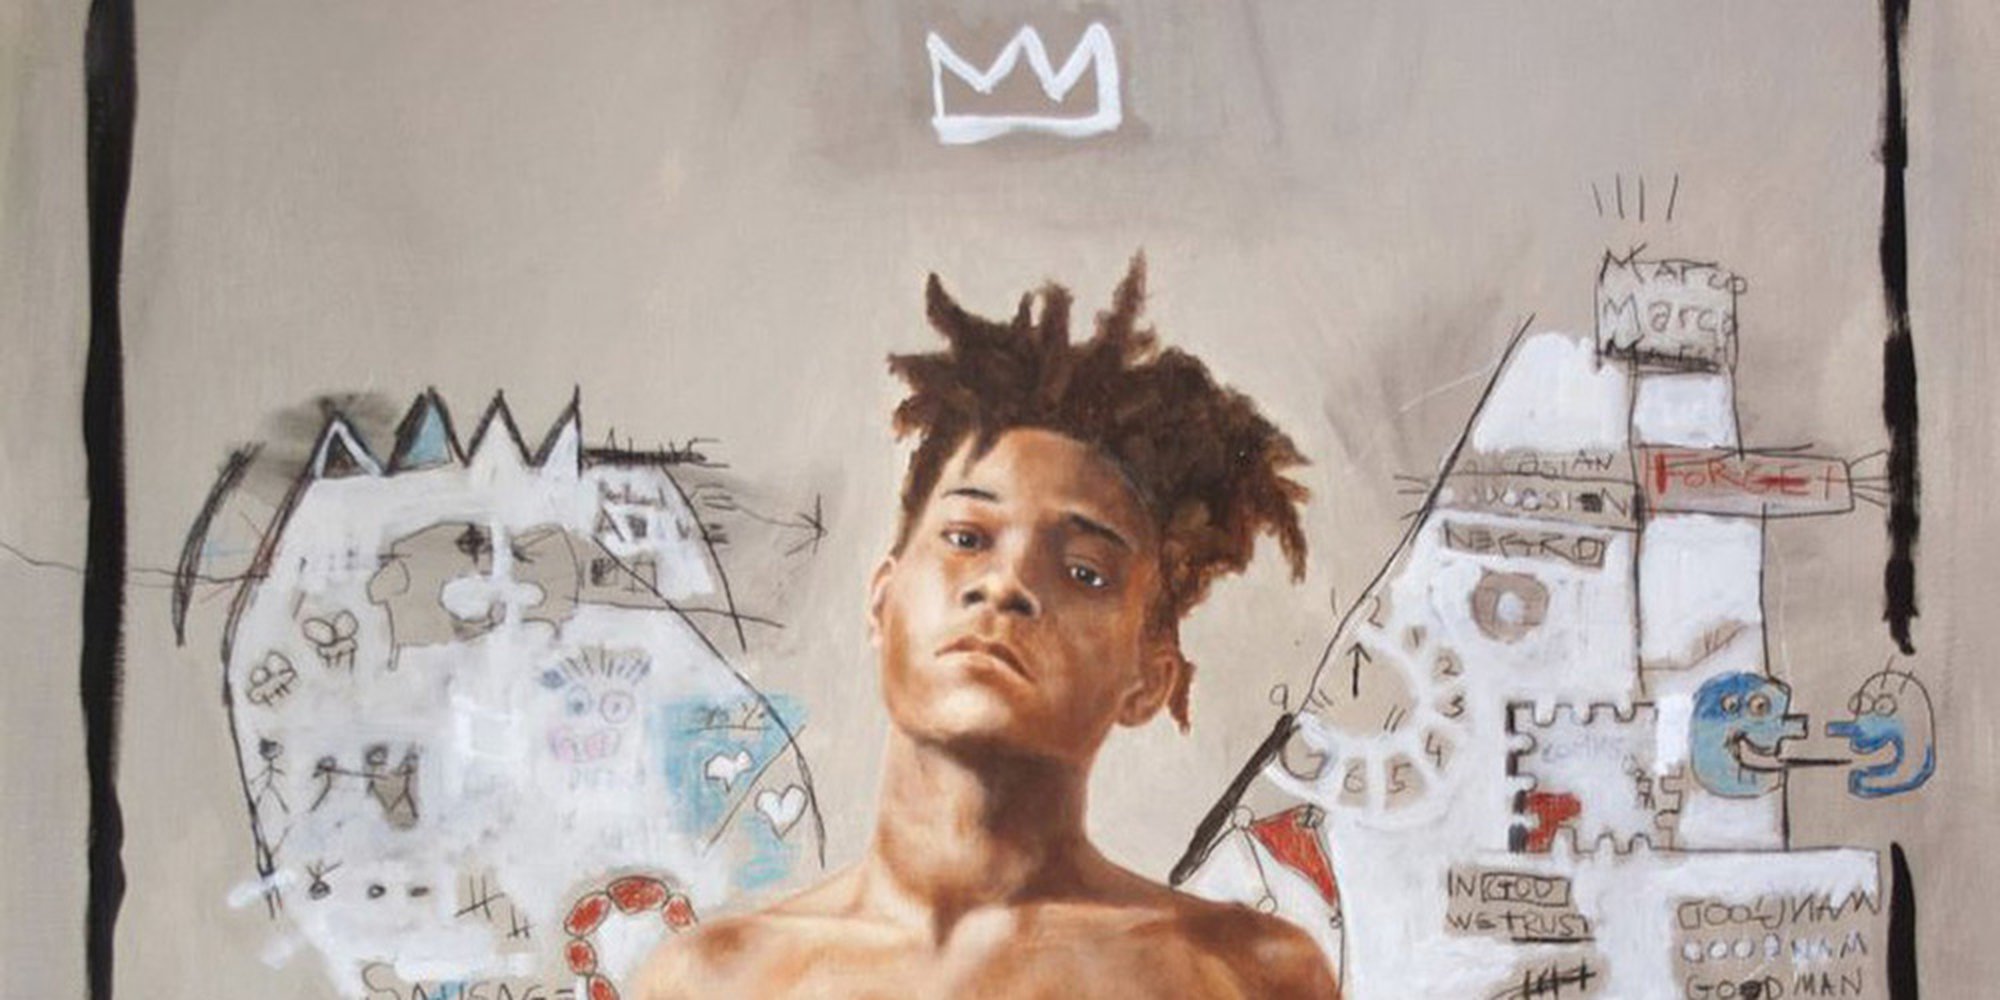 The short but influential life of Jean-Michel Basquiat